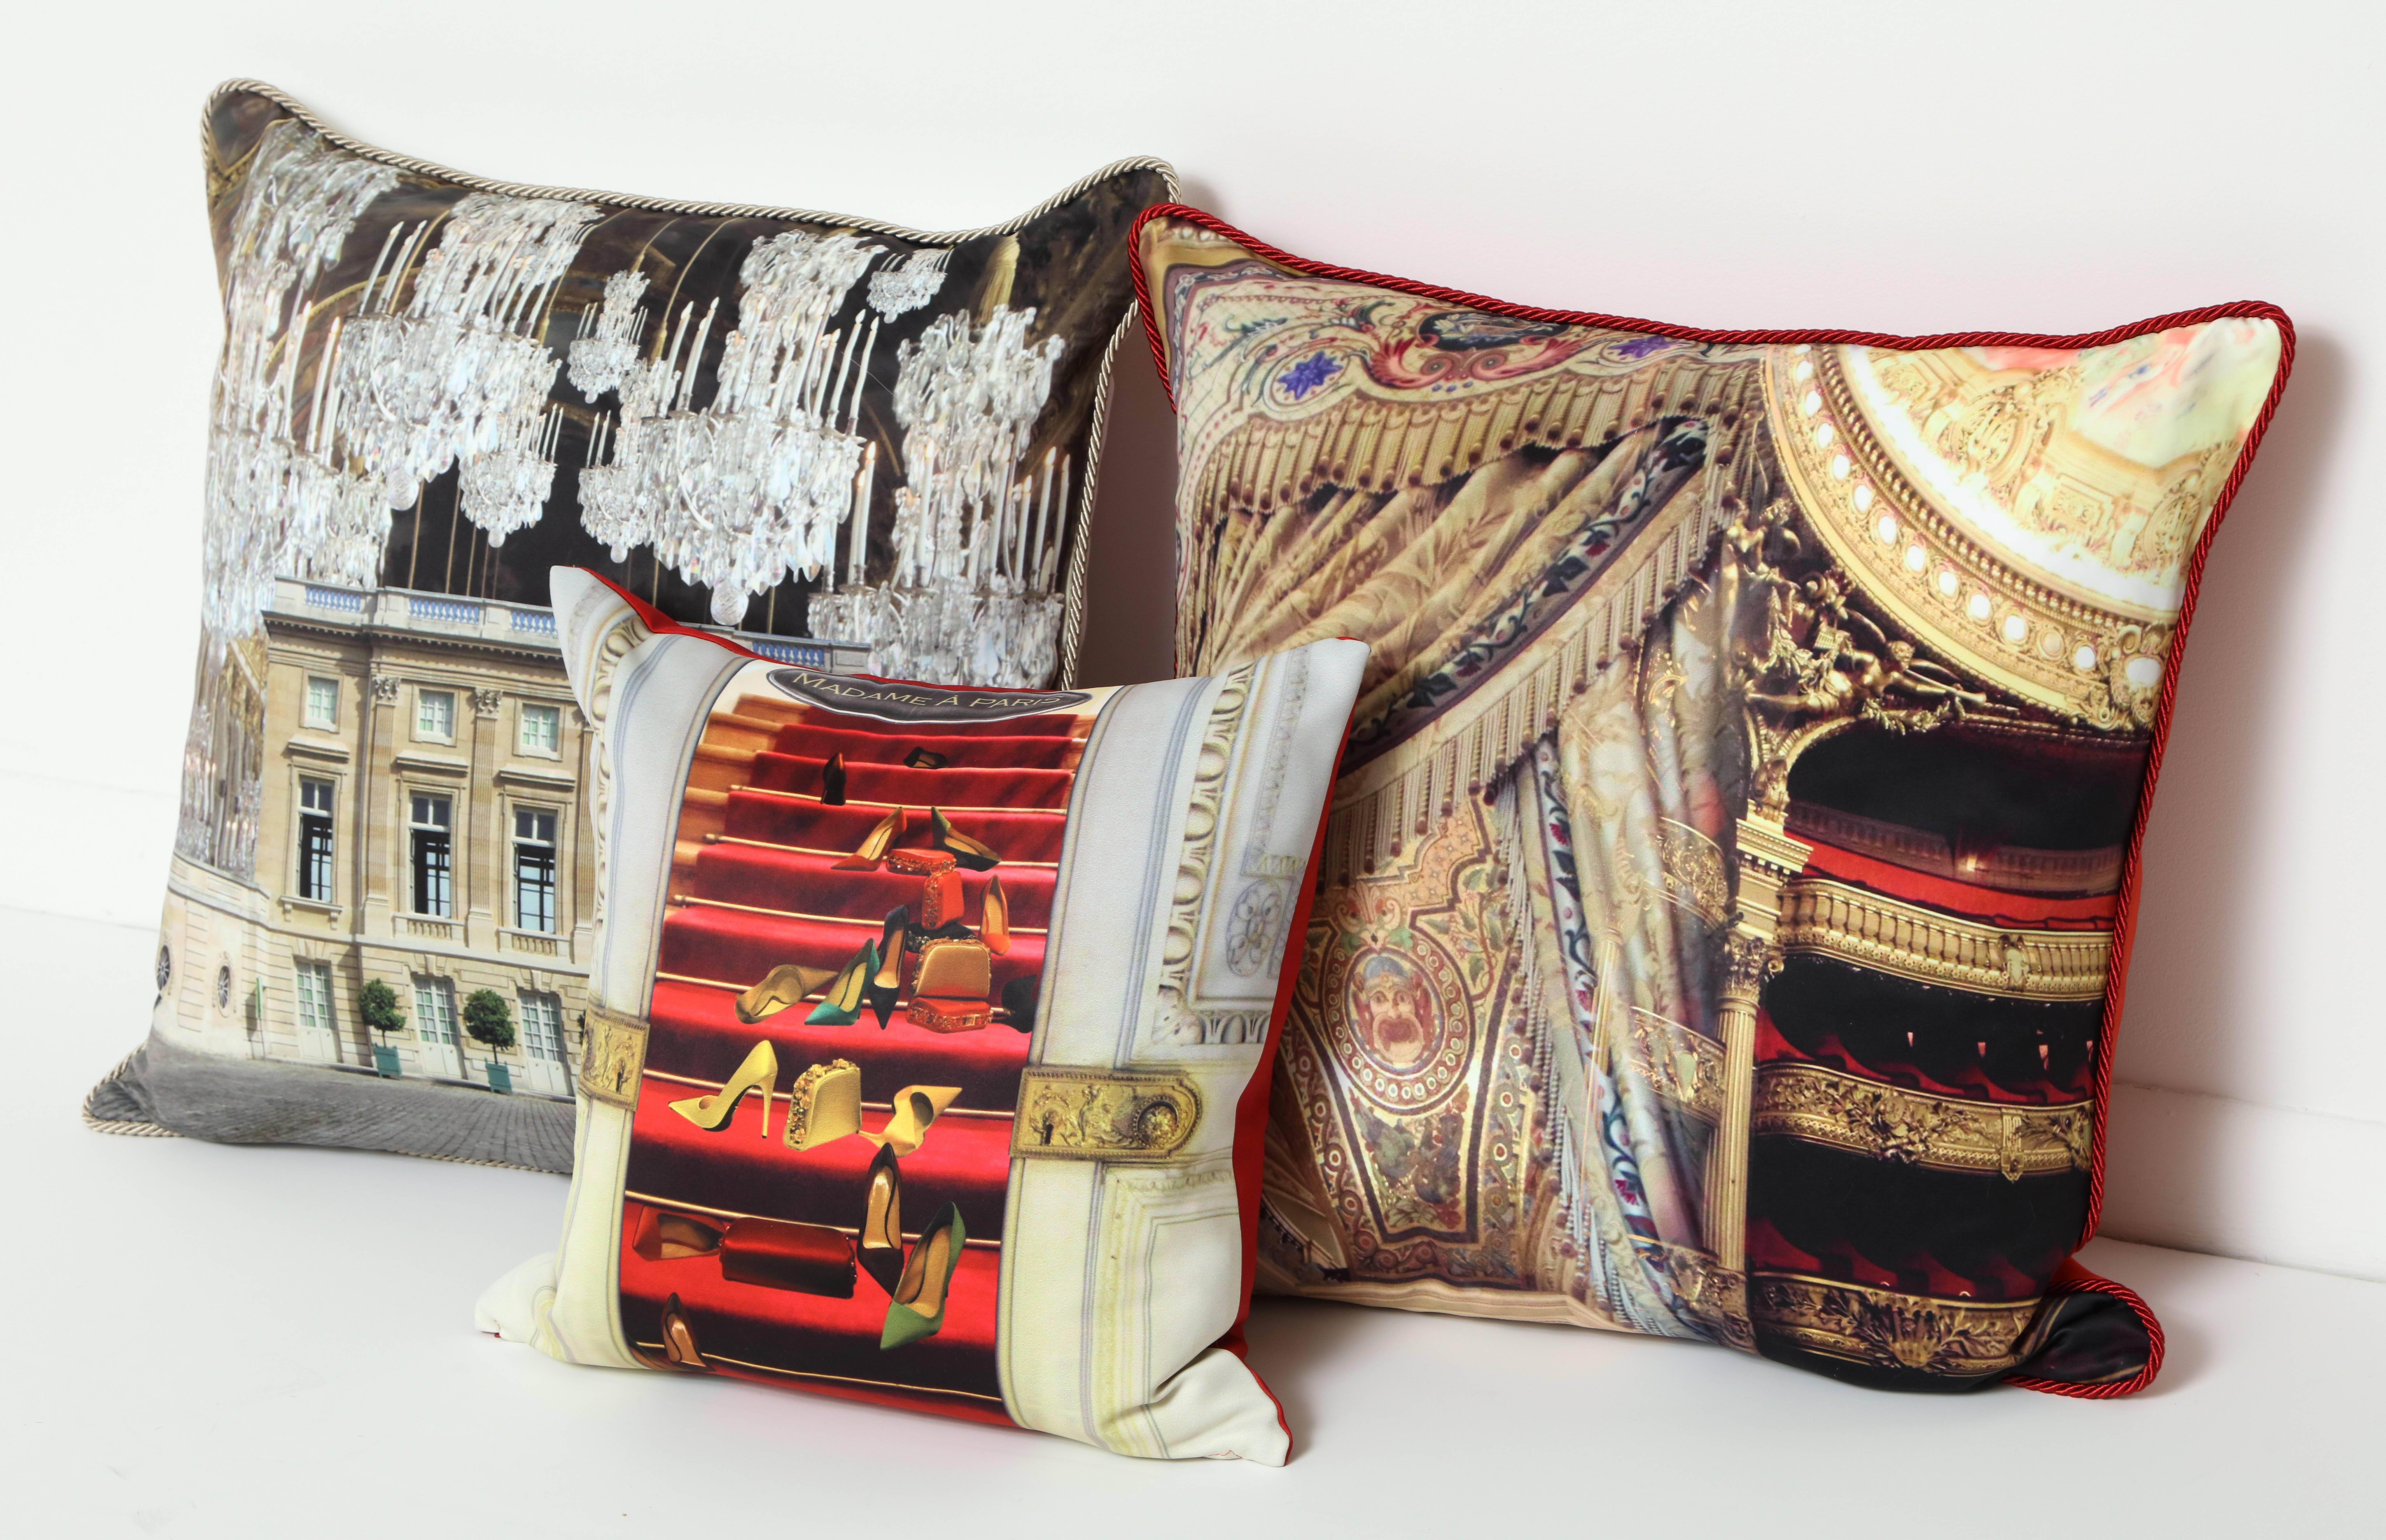 Group of three silk pillows with beautiful pictures of the opera in Paris. Two large silk pillows, each pillow is 23 inches x 23 inches, $475 each and the medium size pillow is 17 inches x 17 inches, $350.